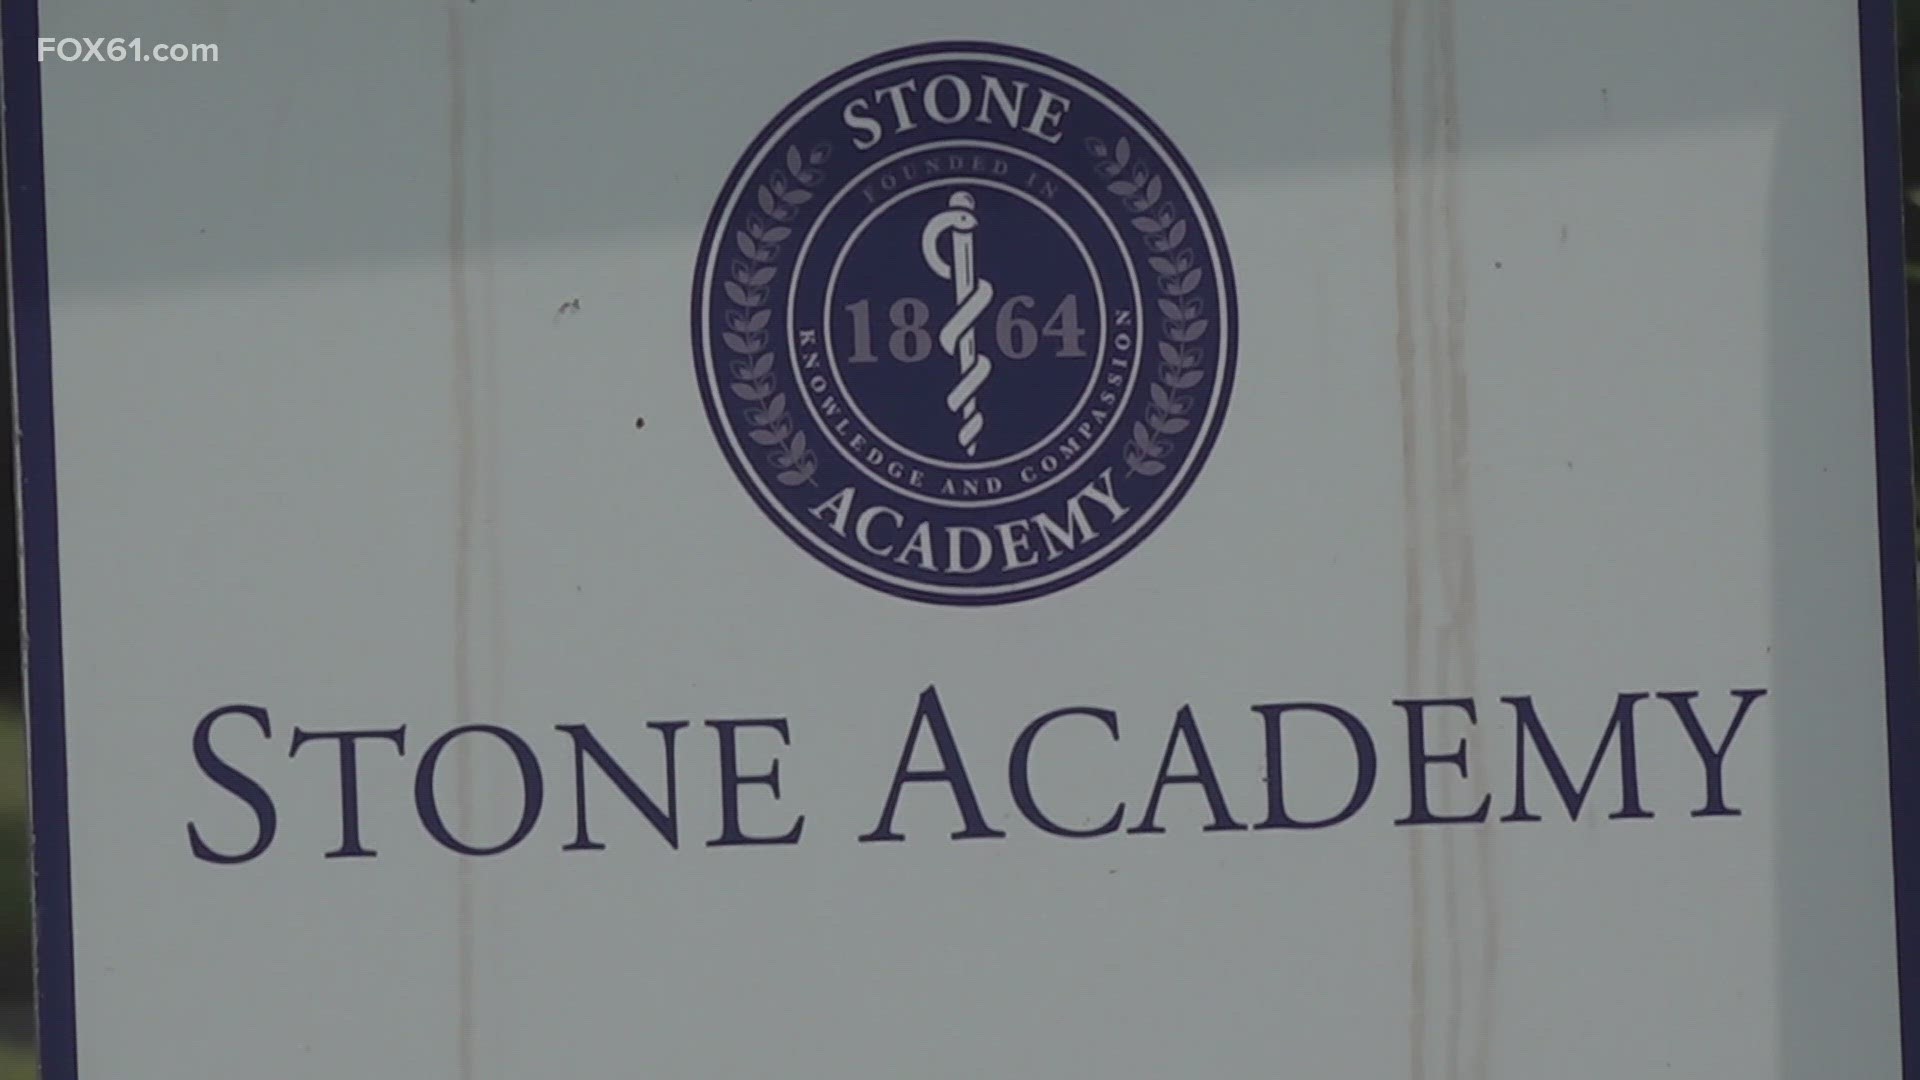 The lawsuit, filed in federal court on Tuesday, is the latest development against Stone Academy.